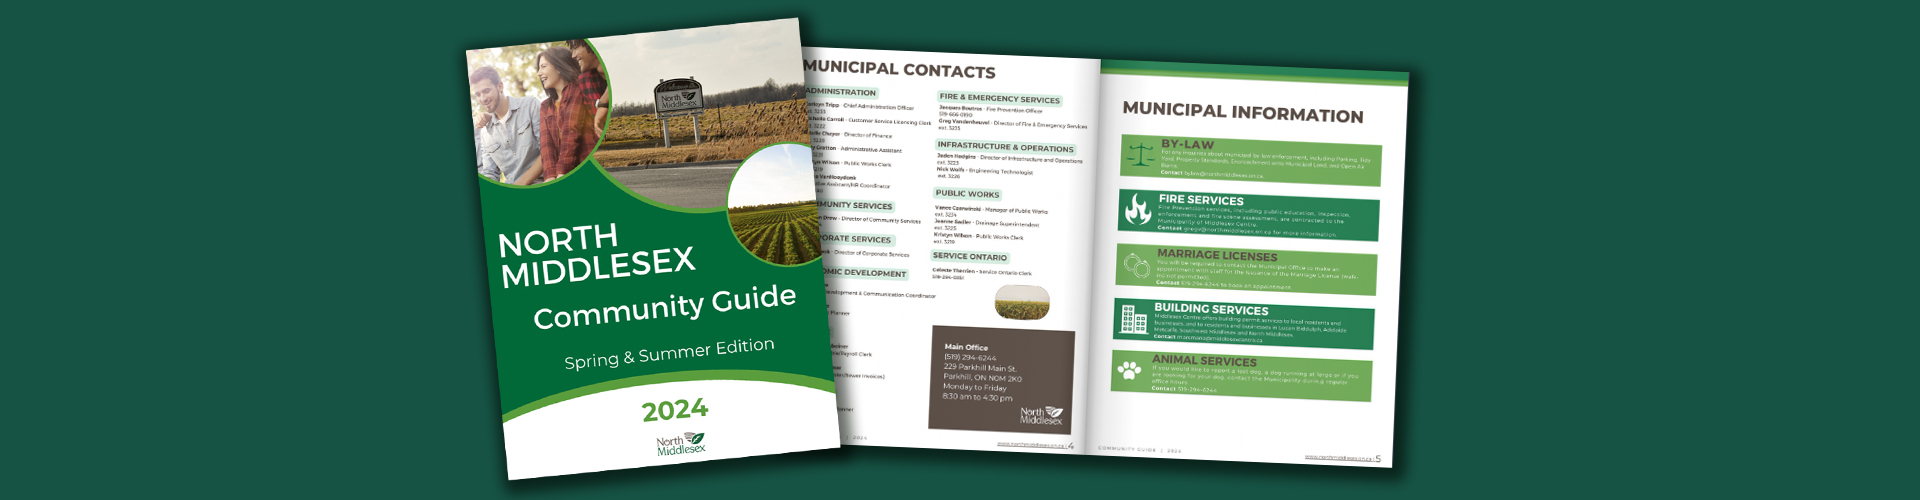 North Middlesex Community Guide